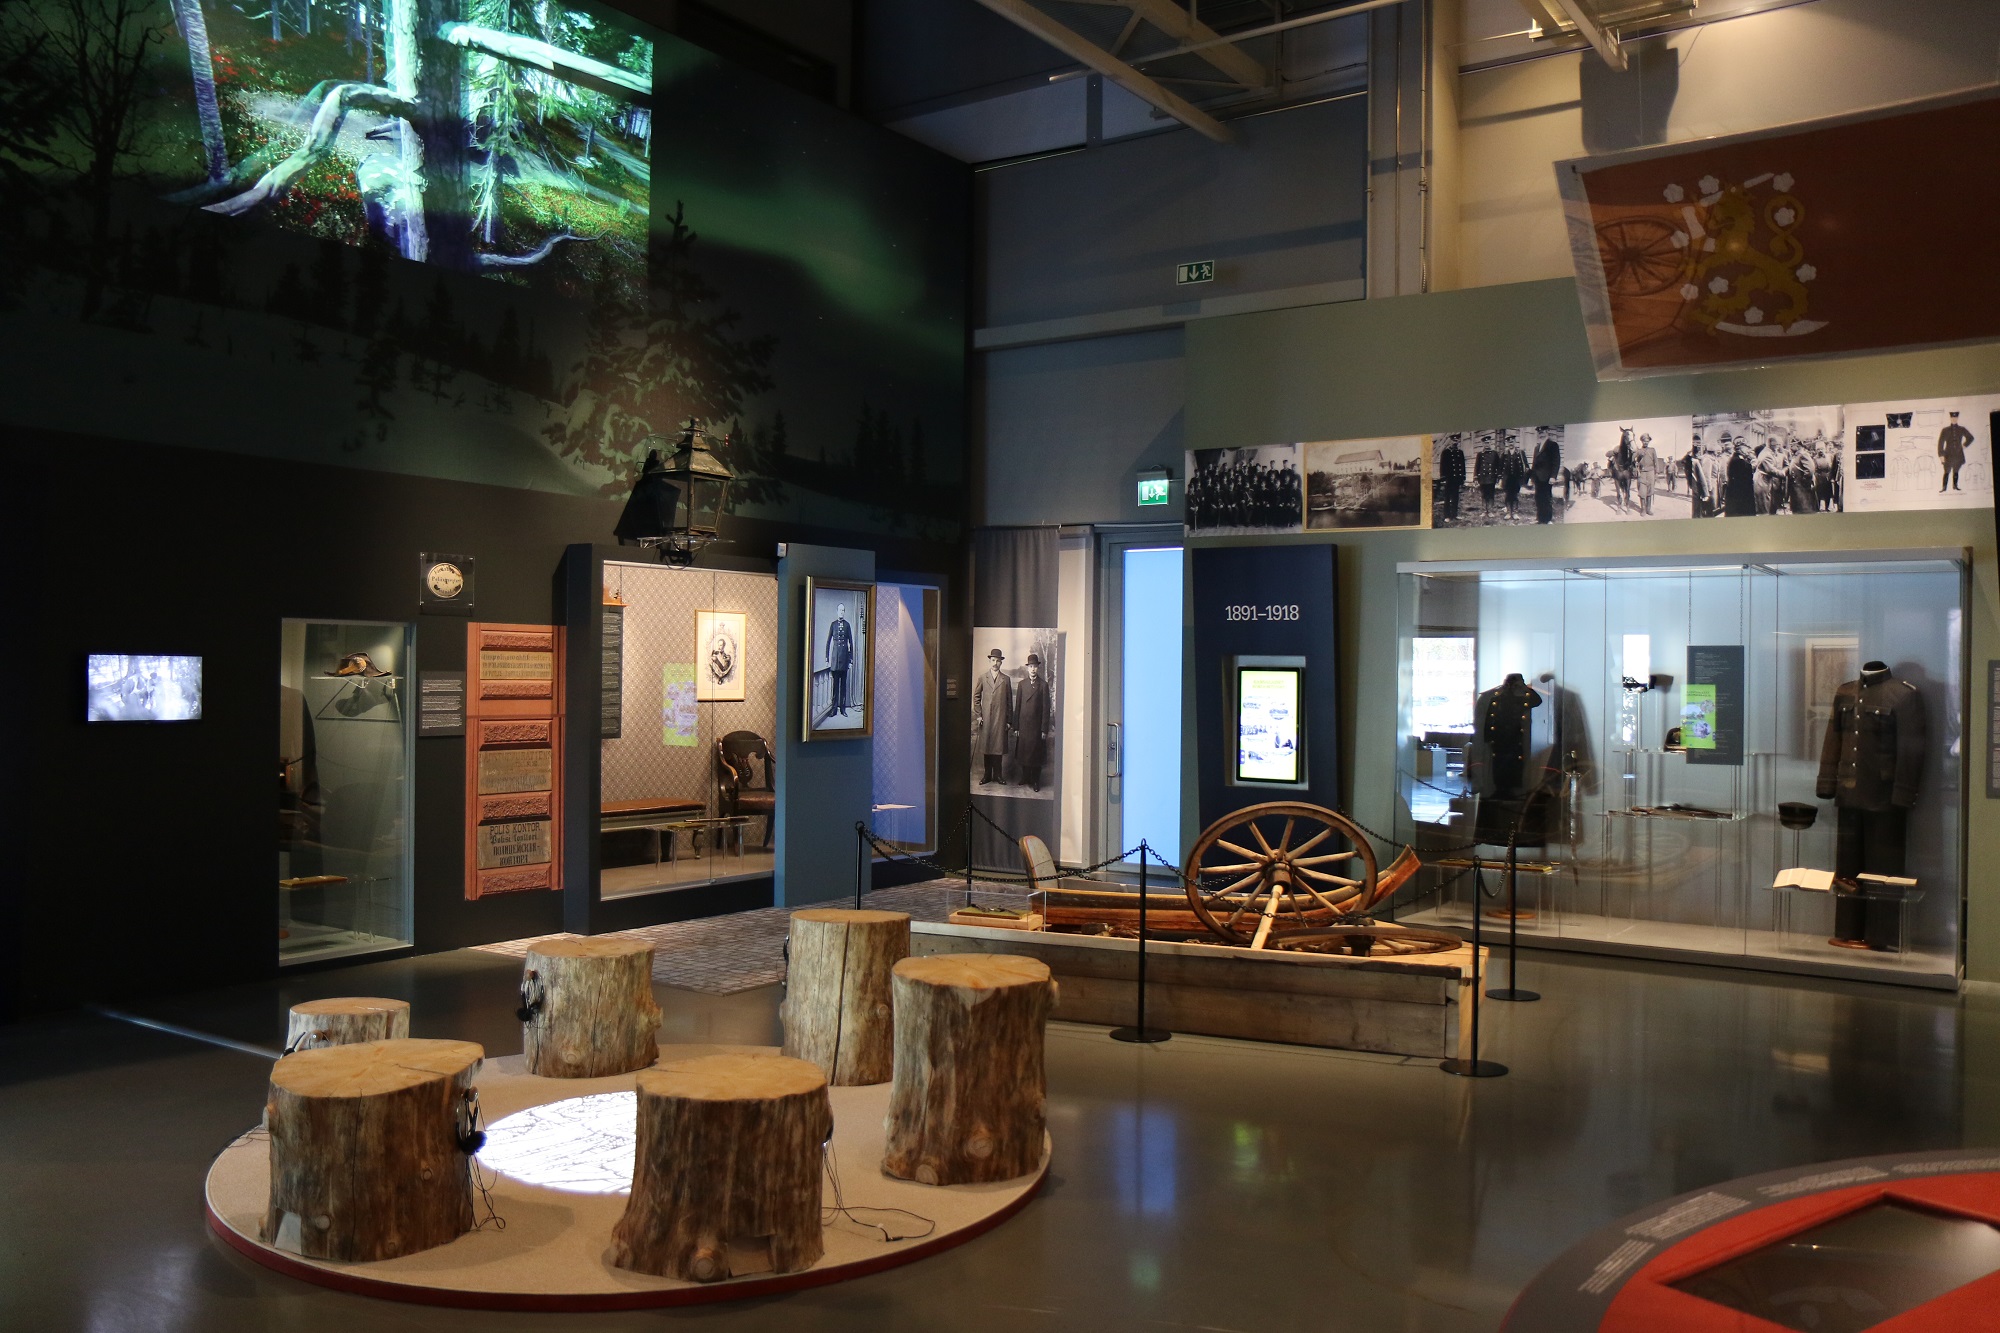 A view of the Museum’s exhibition. The picture shows for example wooden stools for visitors, and showcases with objects on display. Photo The Police Museum, Jarkko Järvinen